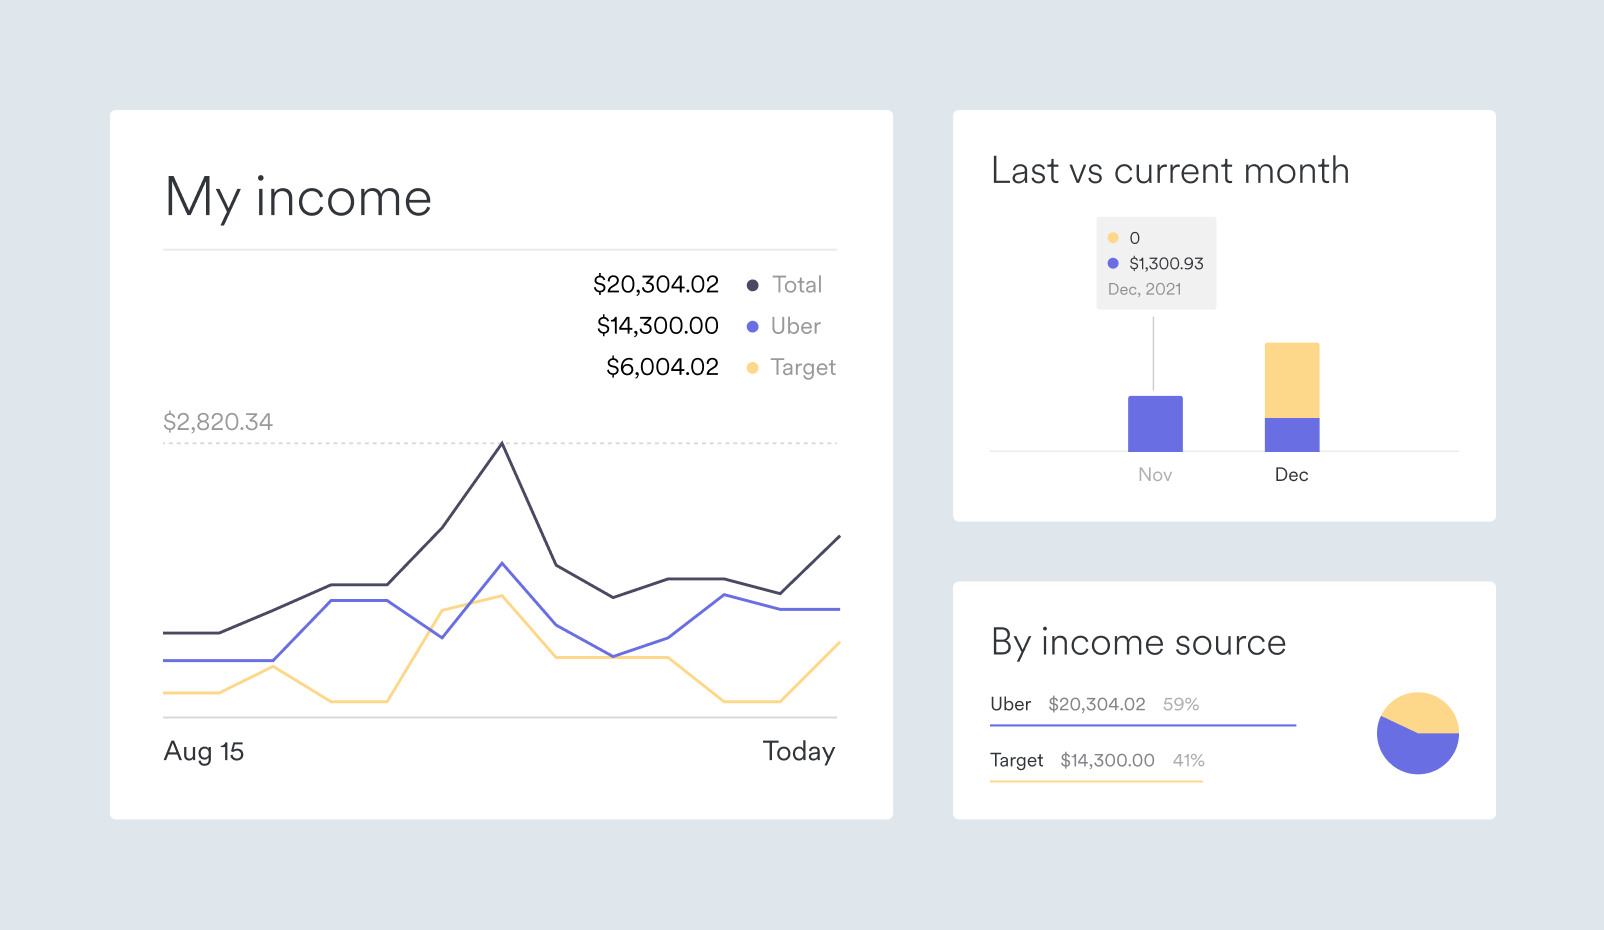 Visualize income data for your customers and provide valuable insights.